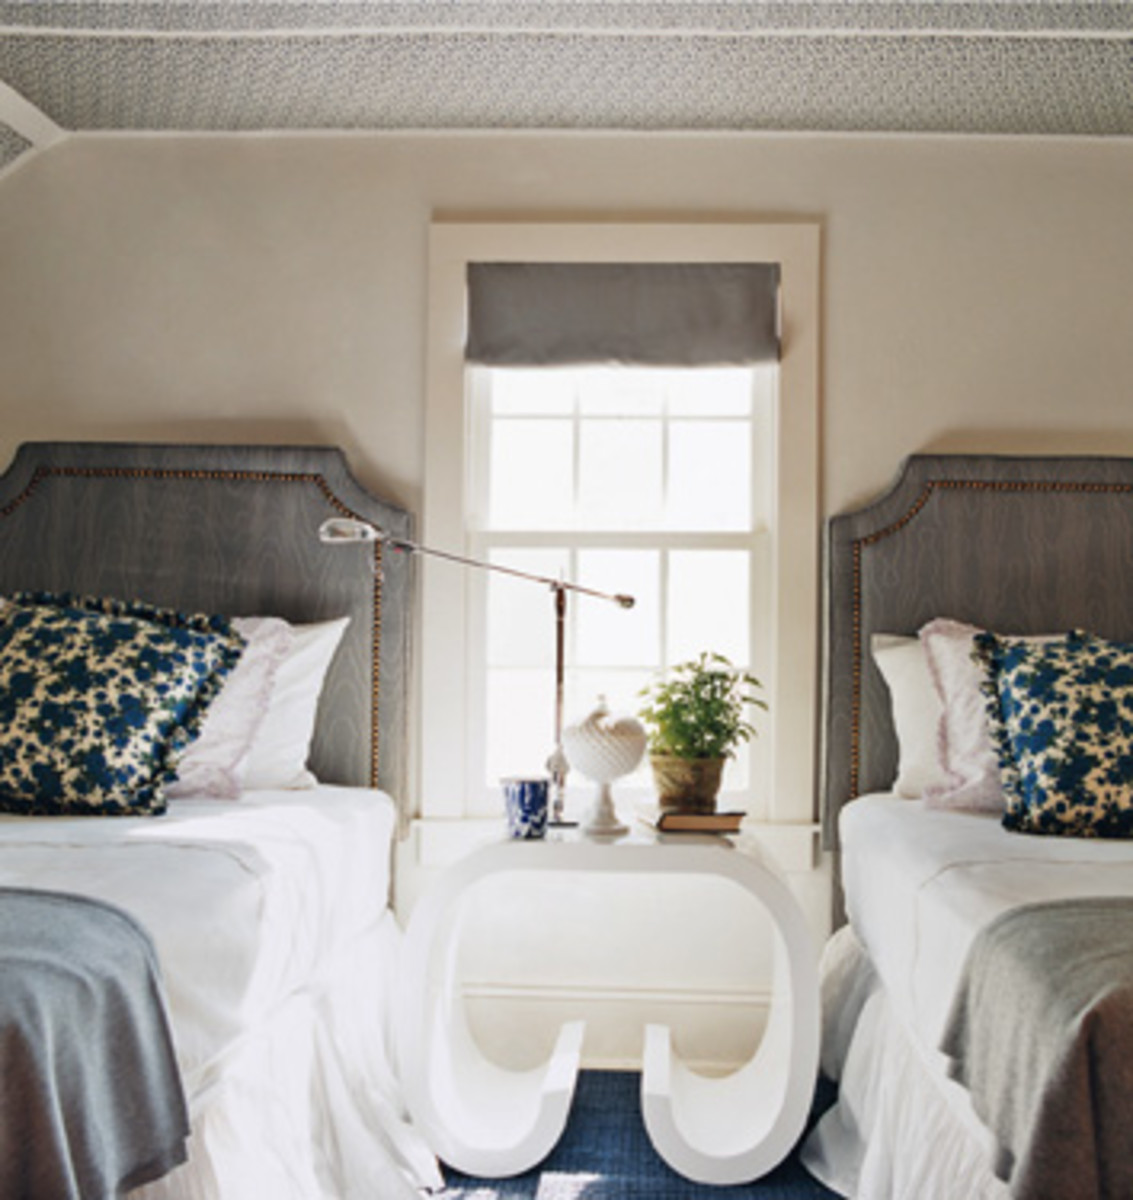 Simple doesn't have to be boring!  These headboards are simply beautiful.